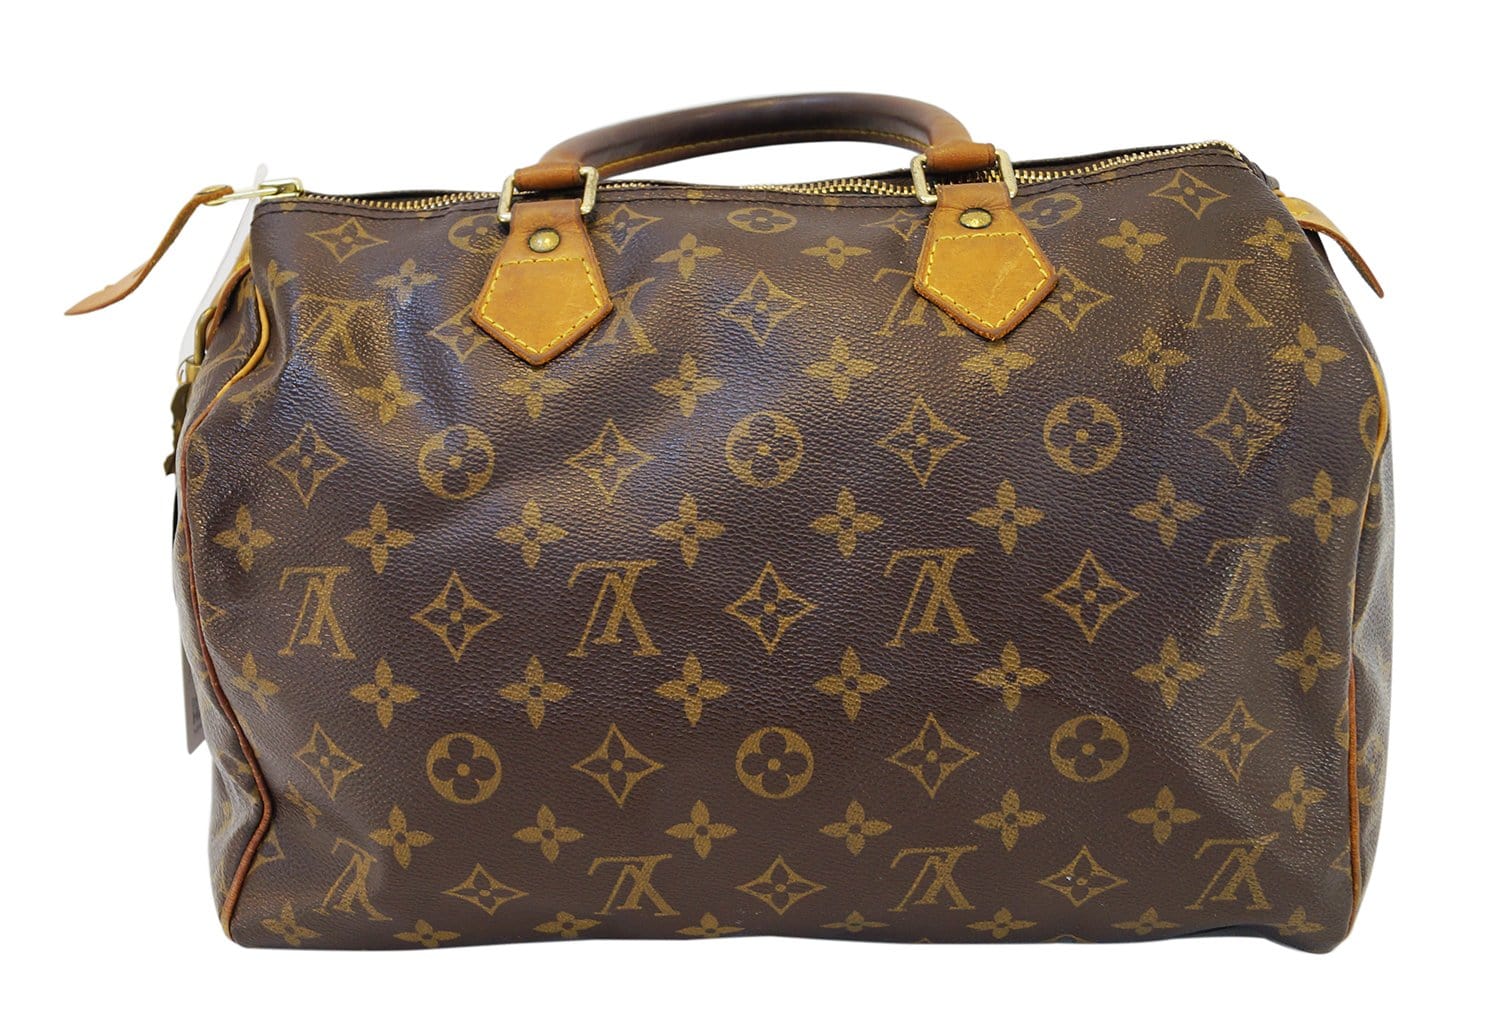 Louis Vuitton 2007 pre-owned Limited Edition Speedy 30 Bag - Farfetch